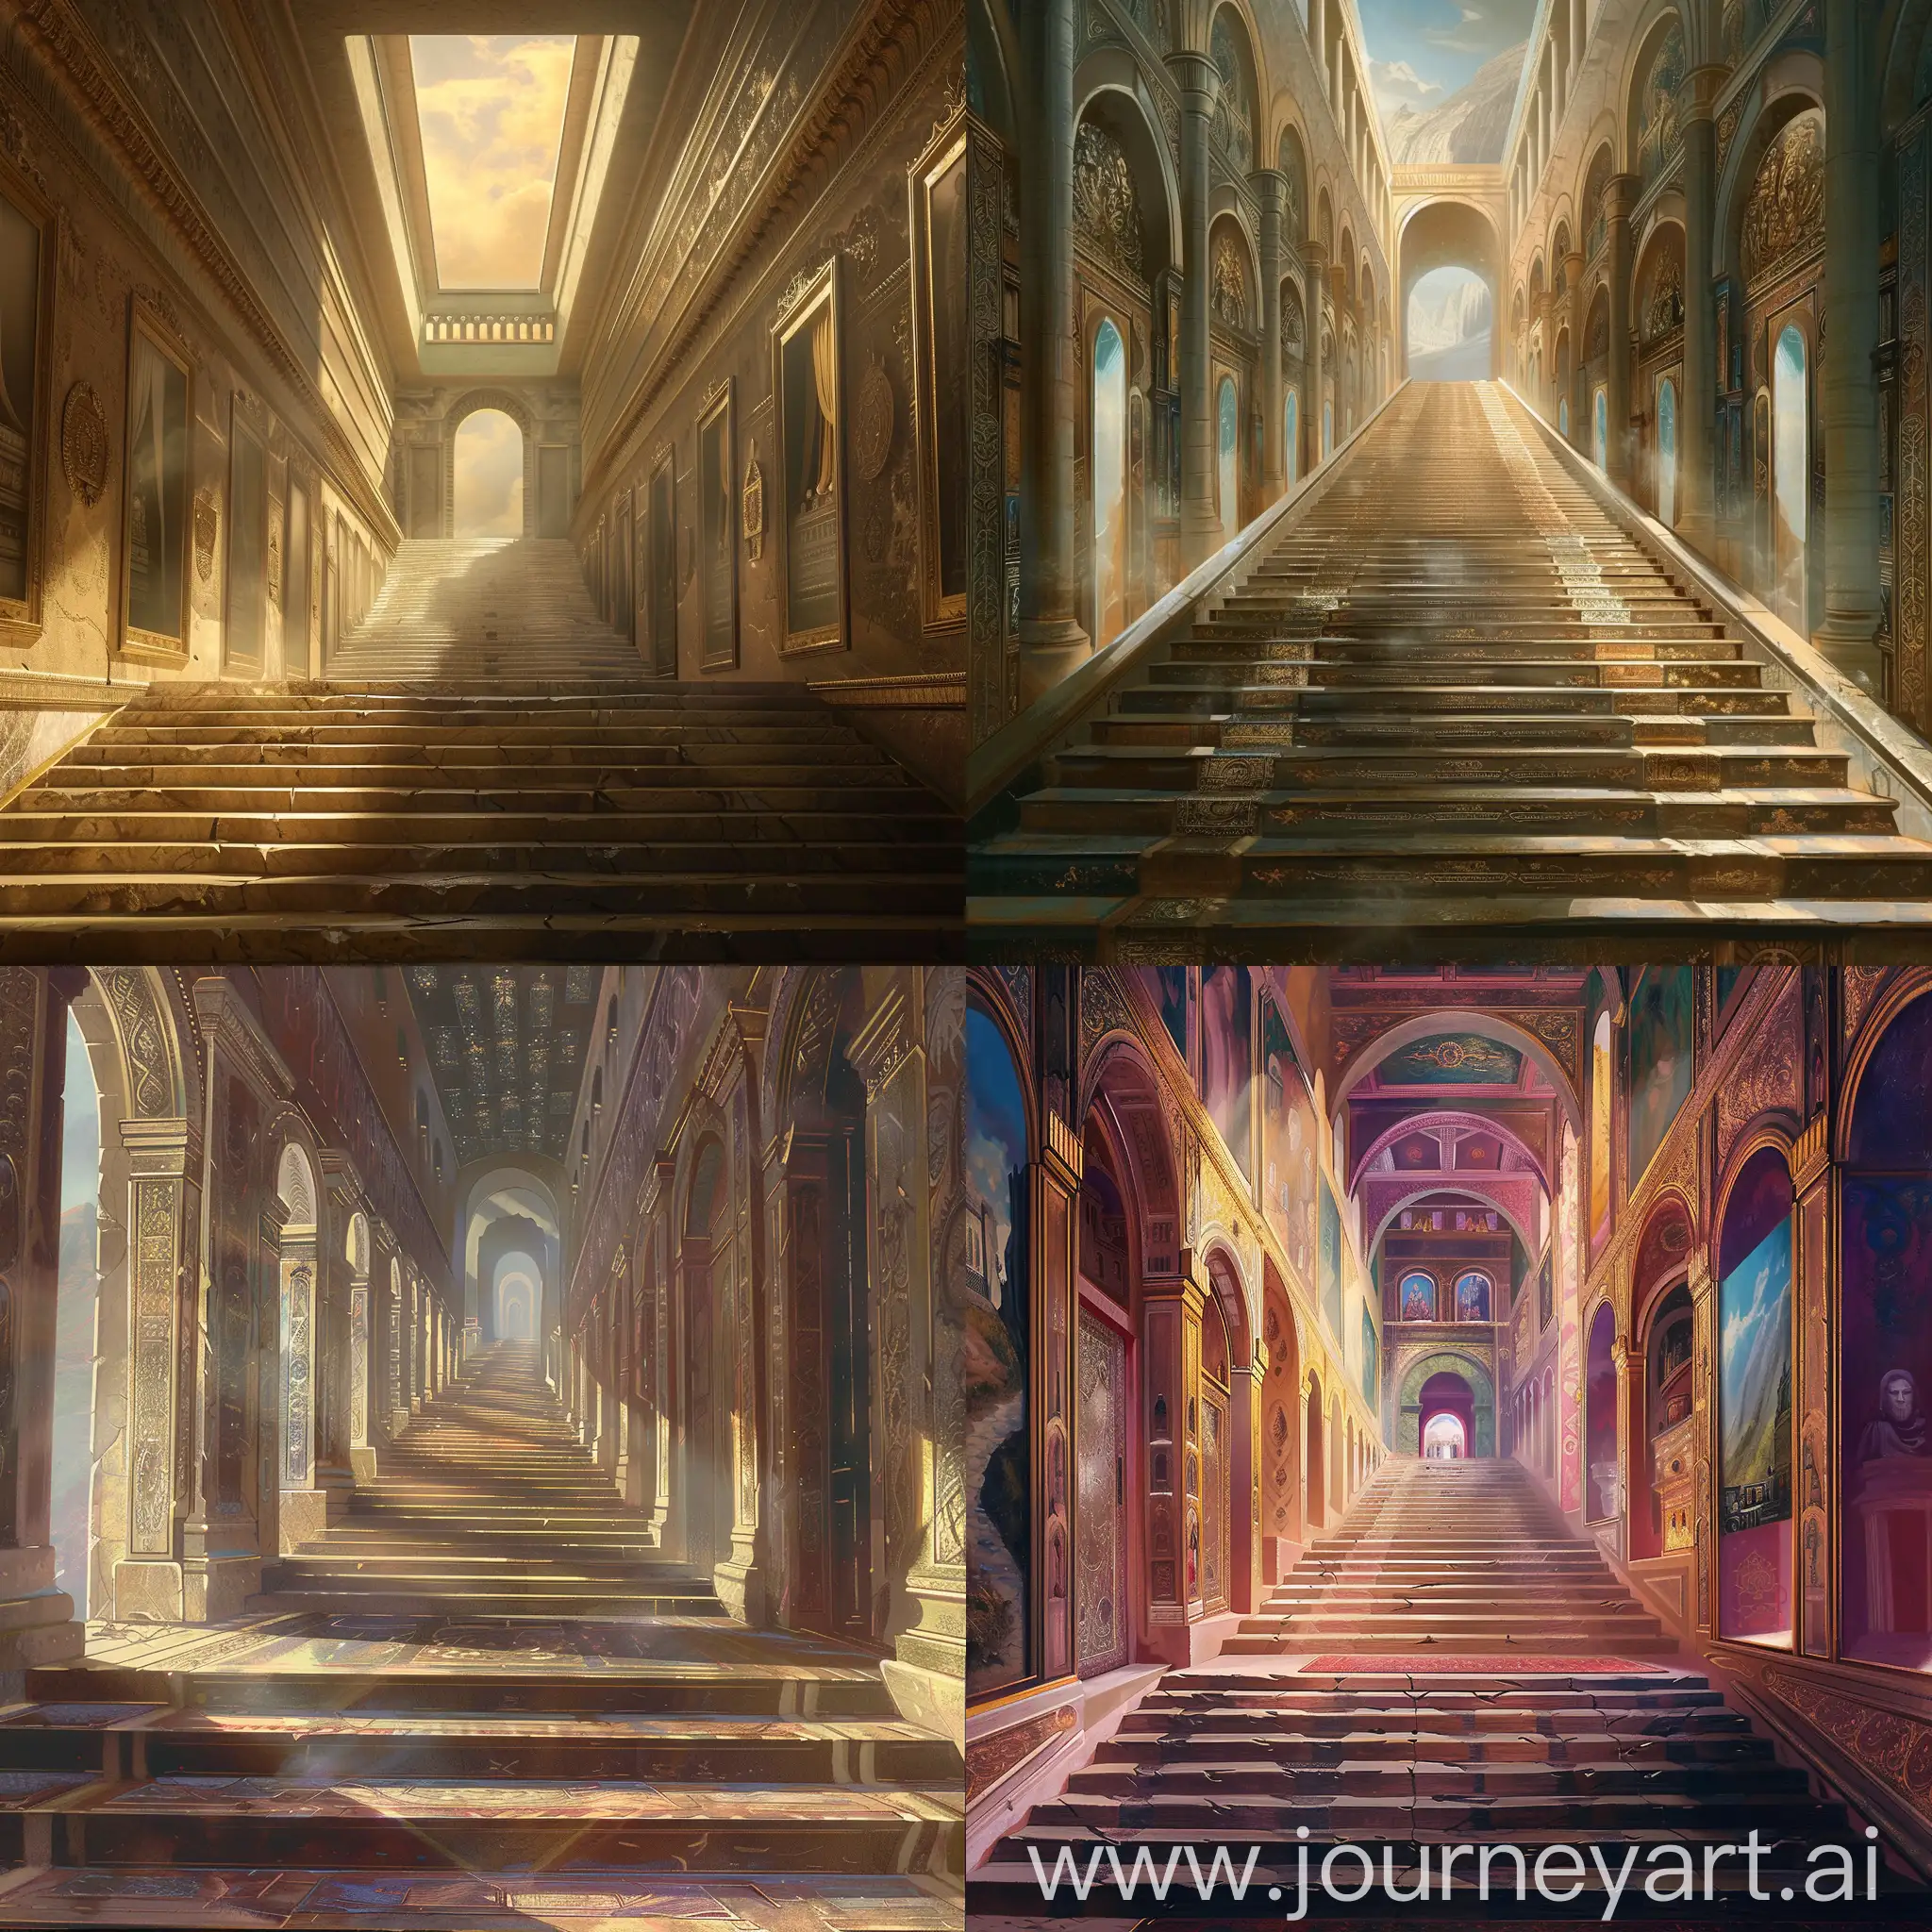 A wide long staircase leading to the treasury. On both sides of the stairs there are many portals. Fantasy